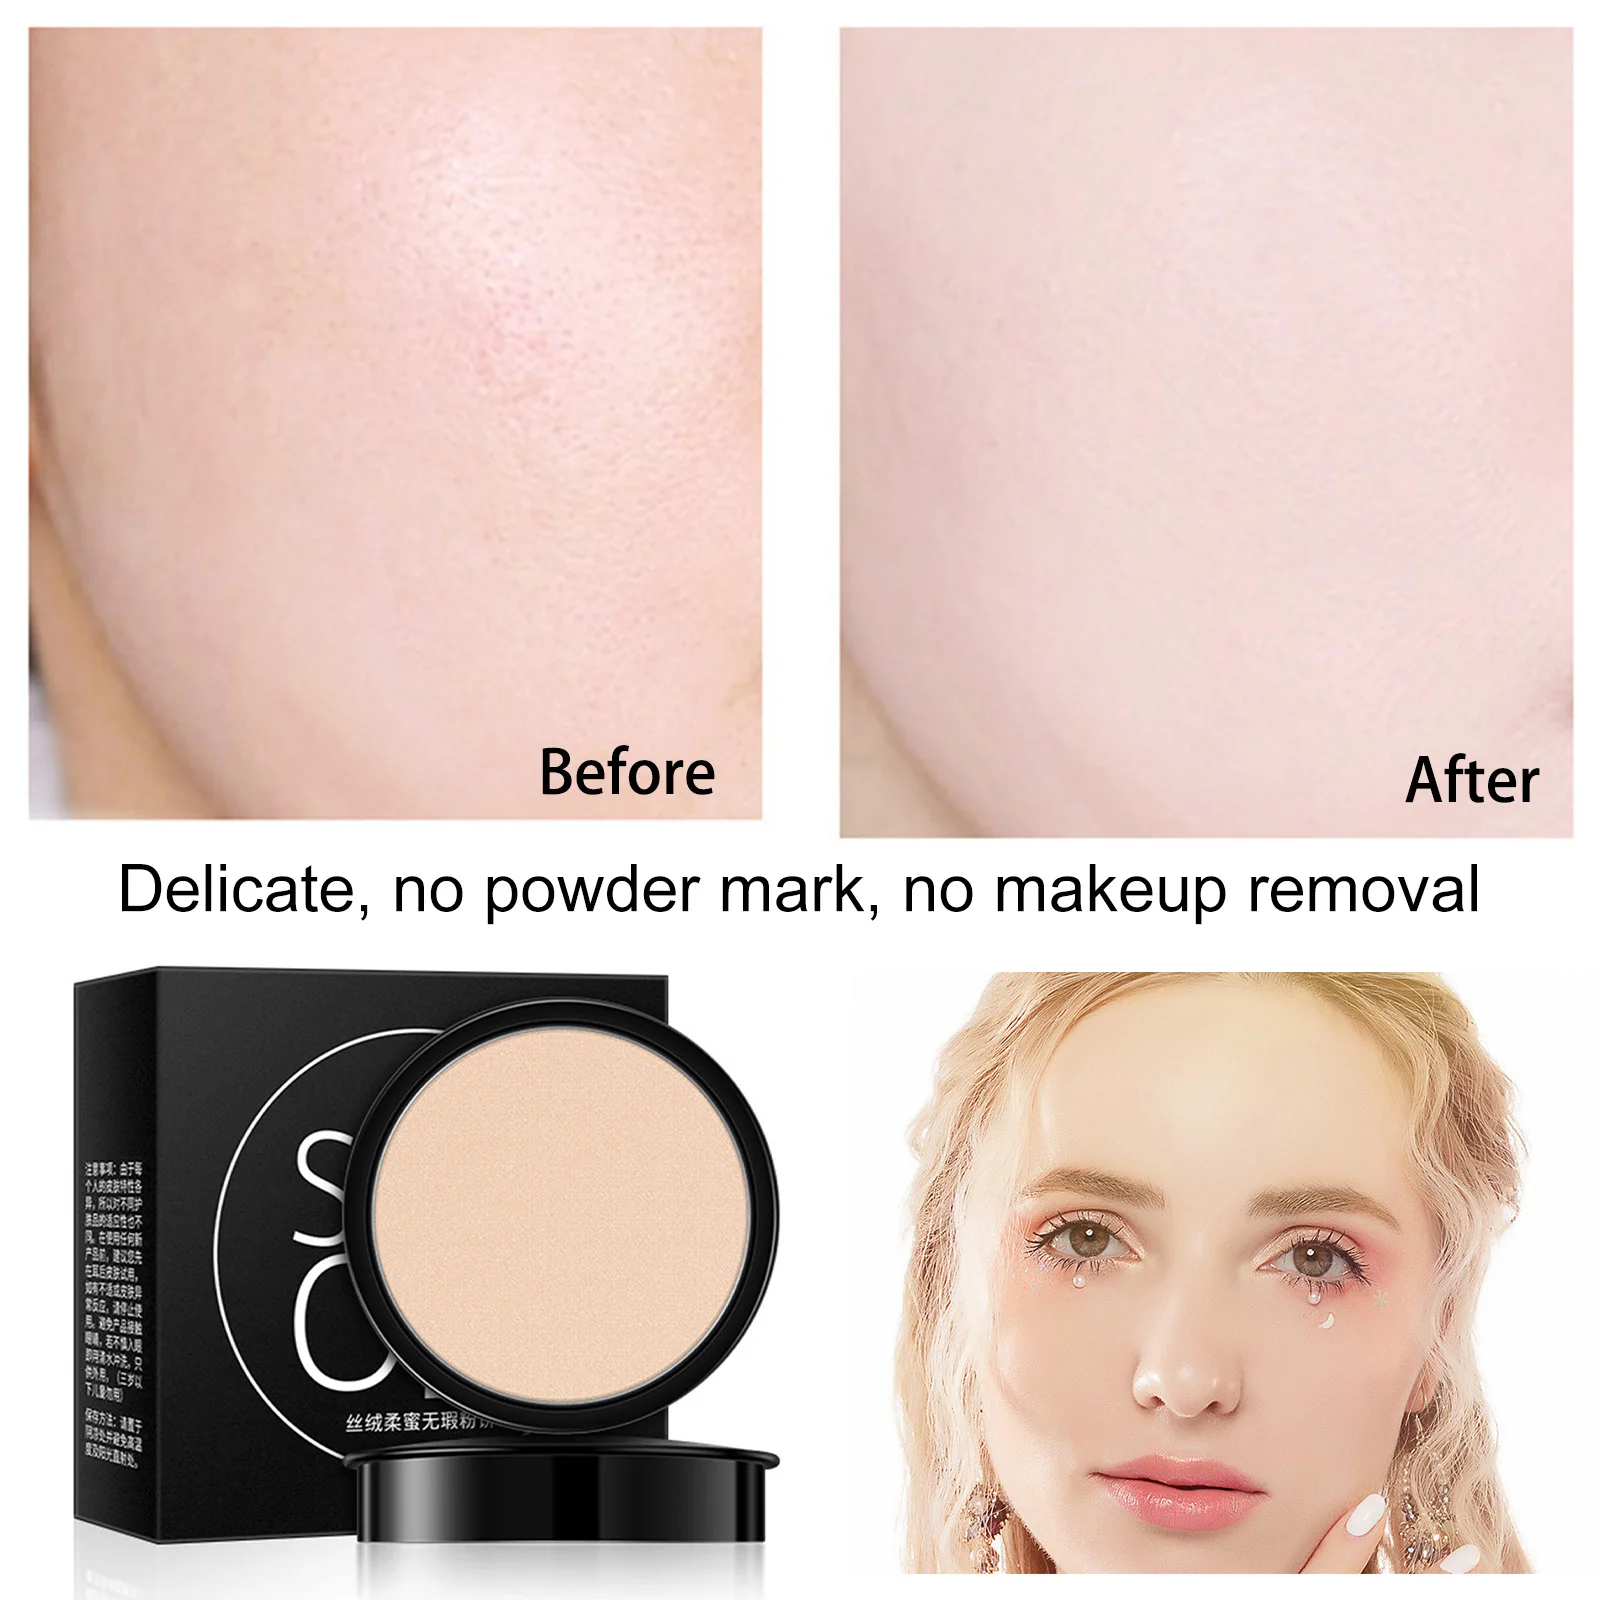 

Full Coverage Long Lasting Makeup Face Powder Foundation Smoothing Pressed Breathable Natural Face Powder Mineral Foundations